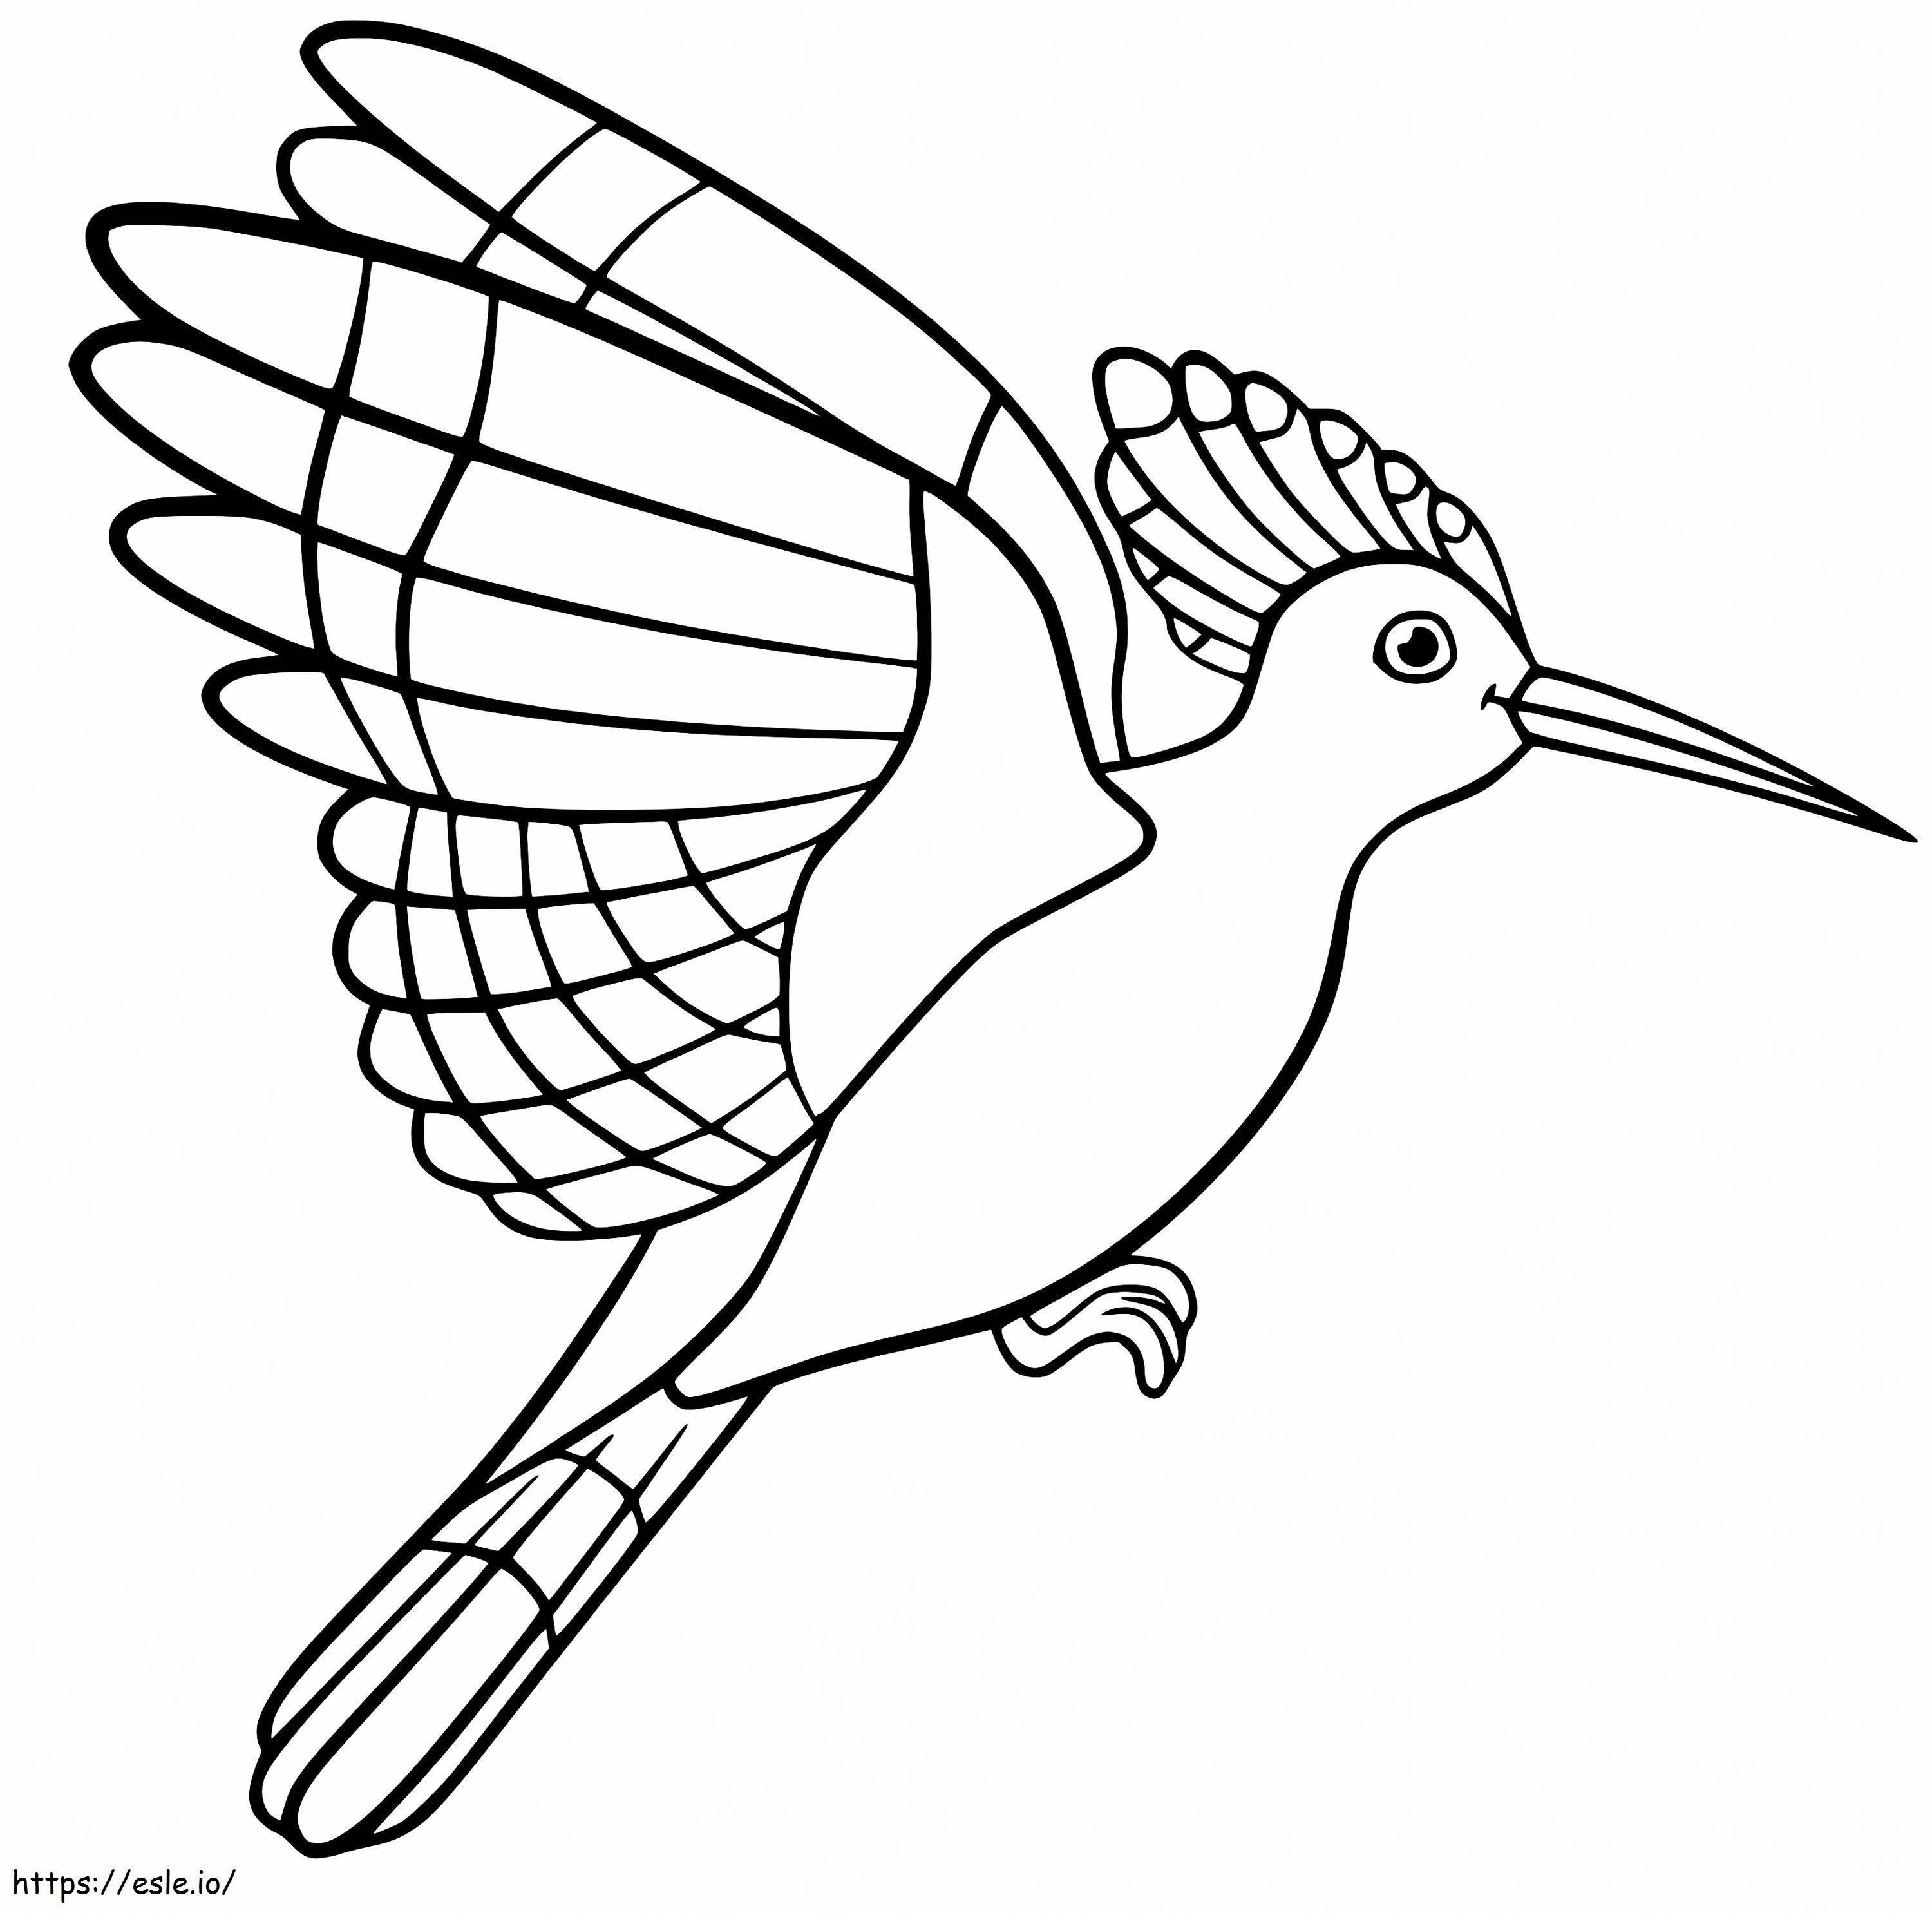 Lovely Ibis coloring page